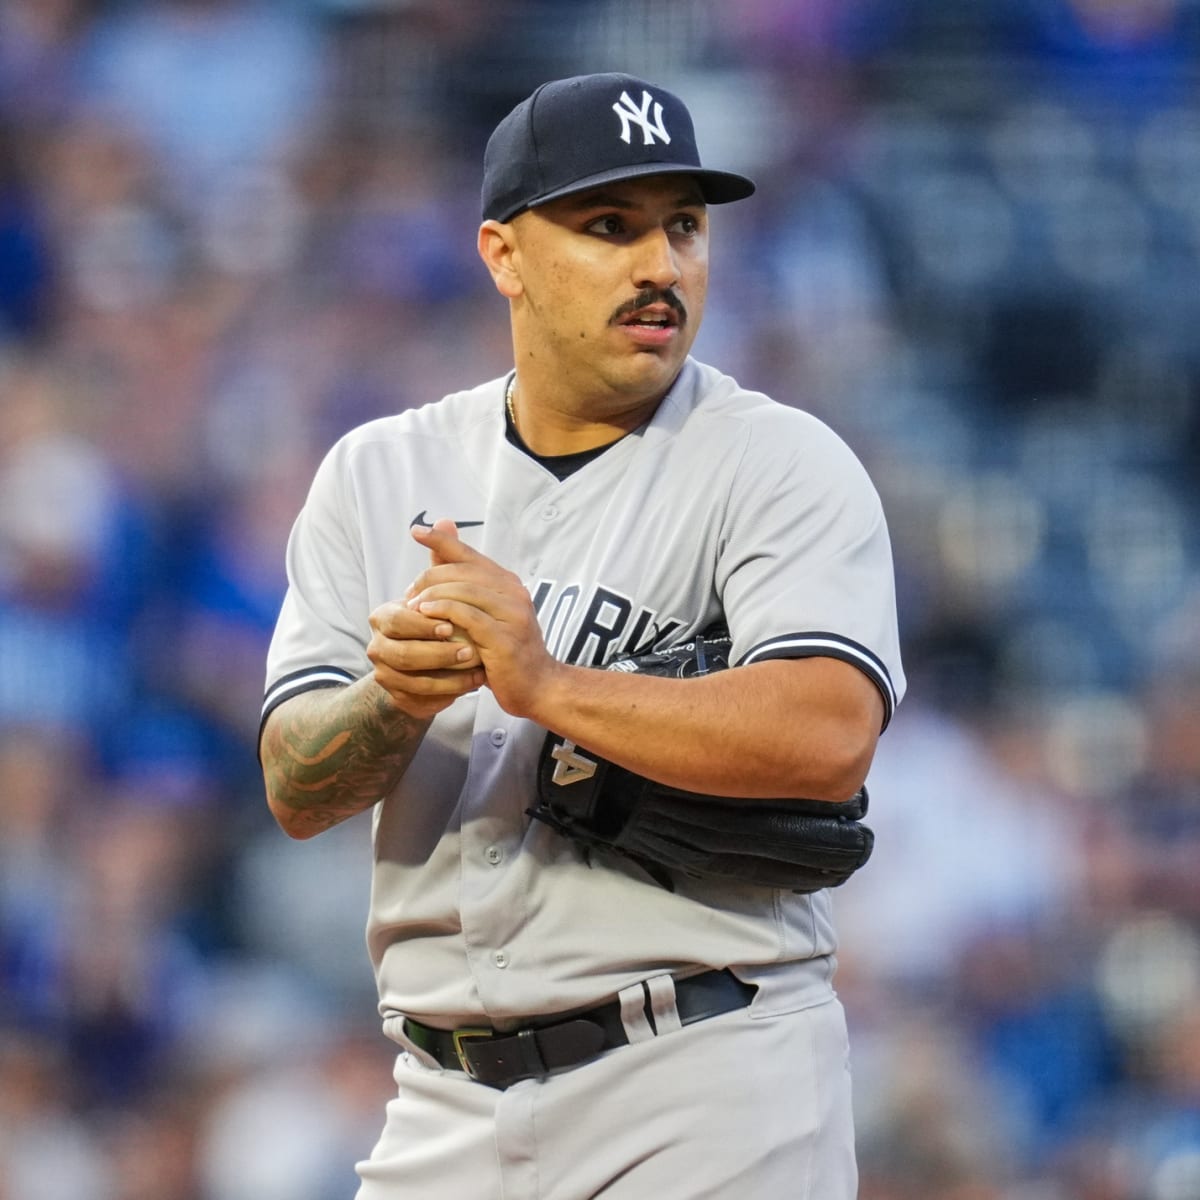 Yankees' Nestor Cortes is the best story in baseball - The Washington Post